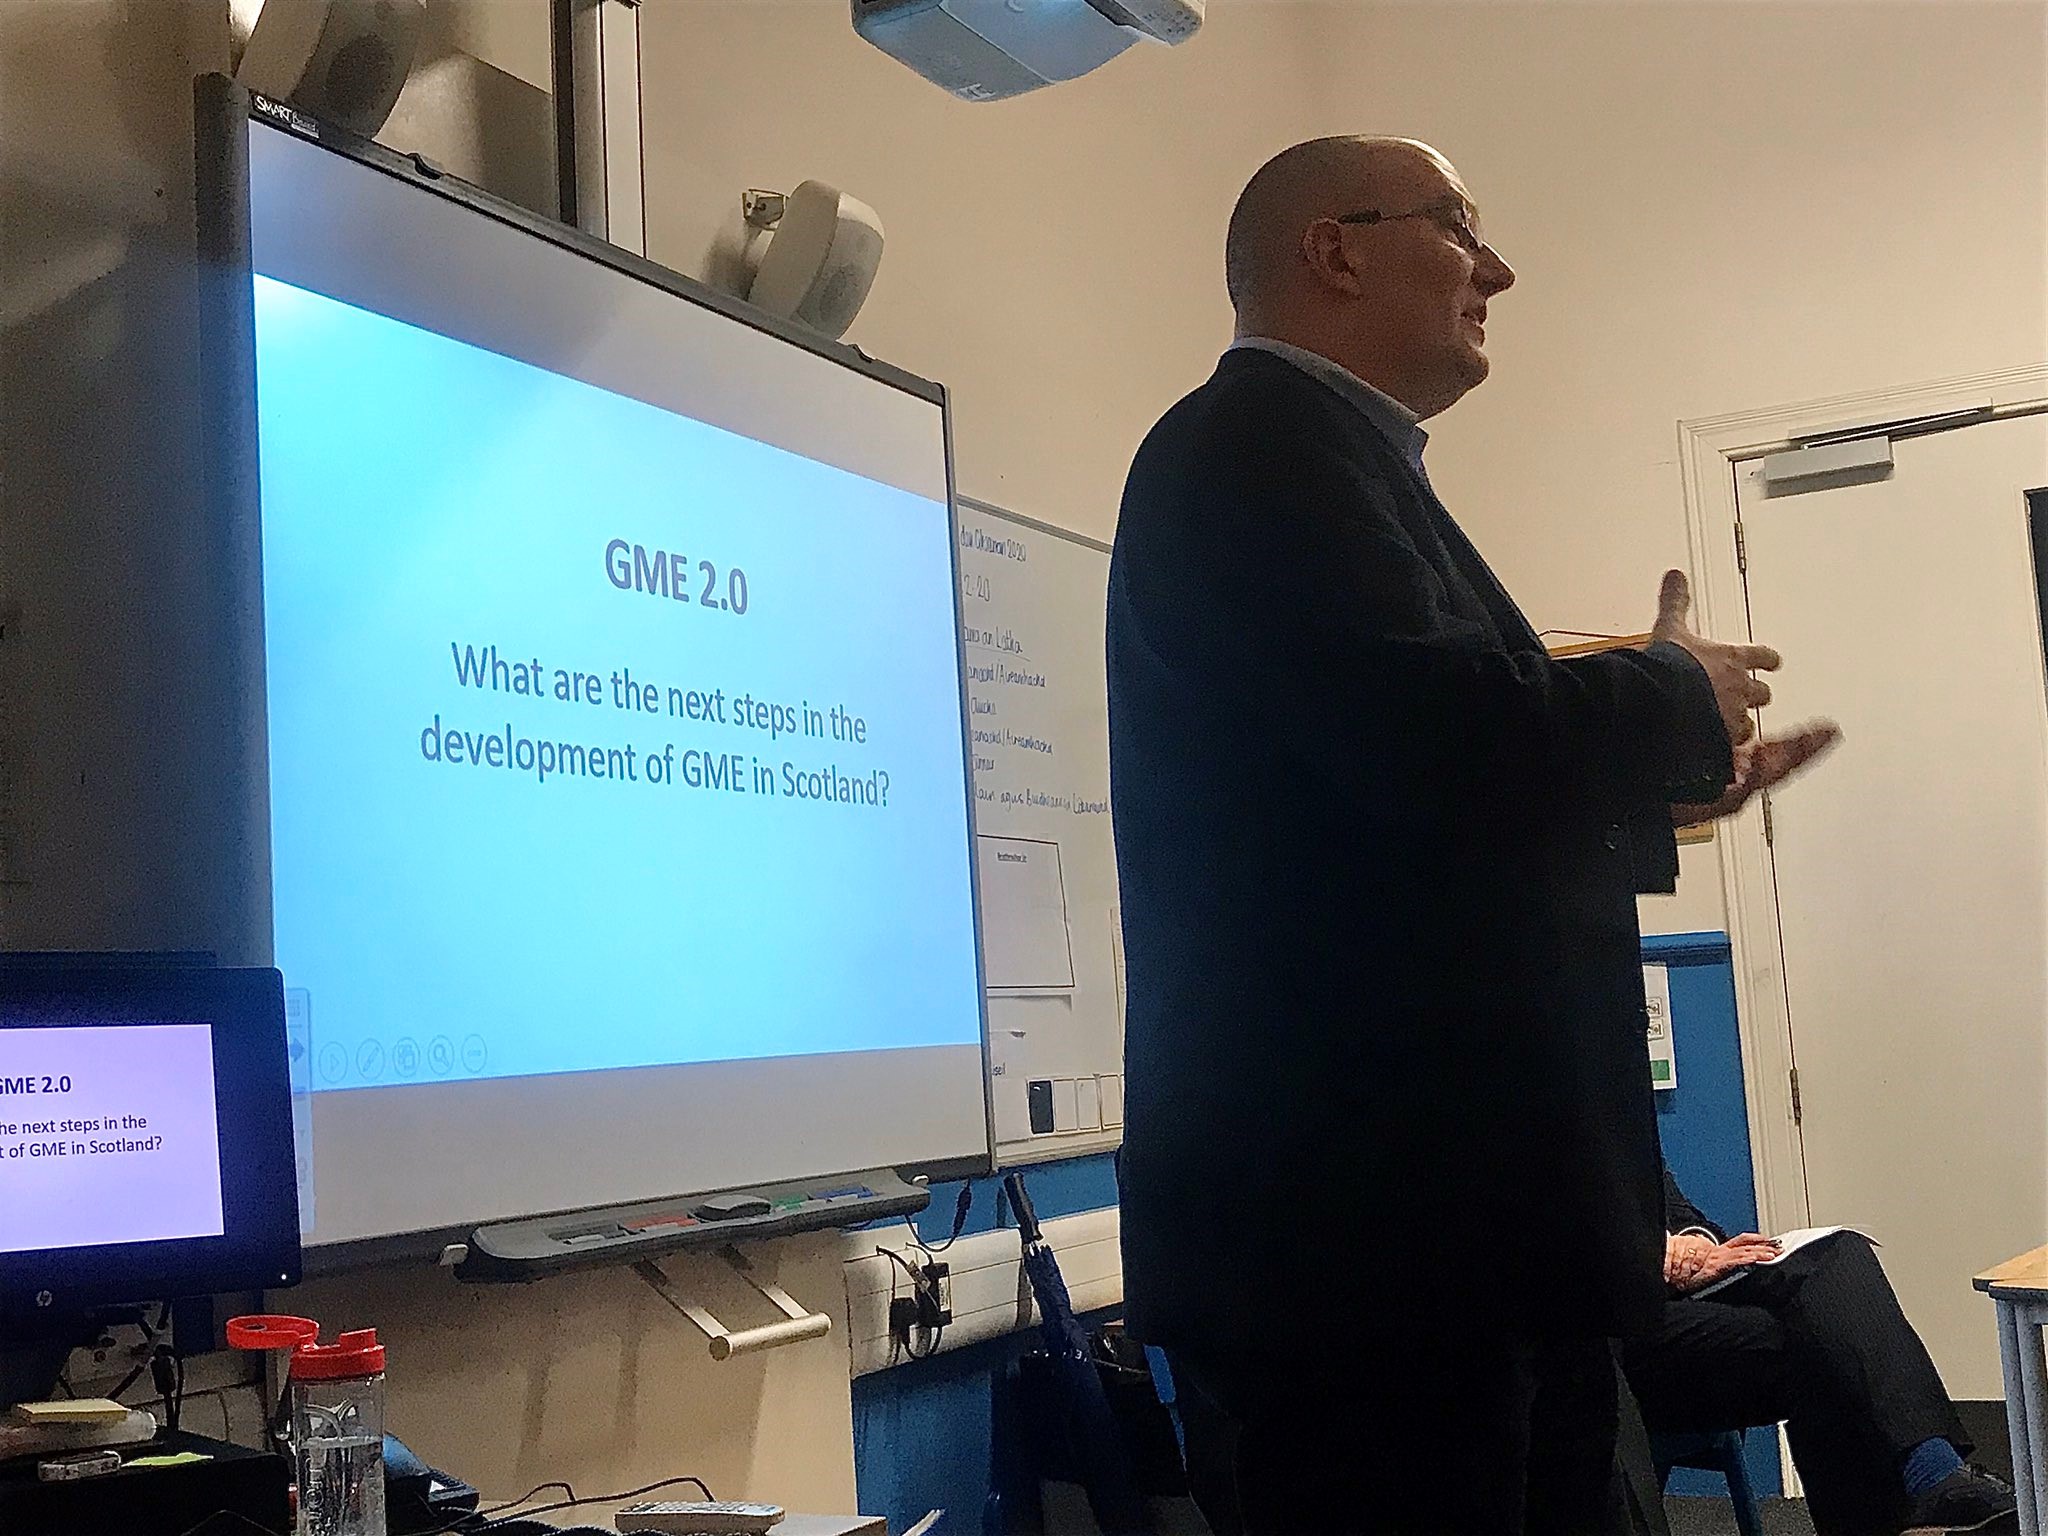 Picture: Man with glasses standing in front of smartboard with "GME 2.0 What are the next steps in the development of GME in Scotland?"